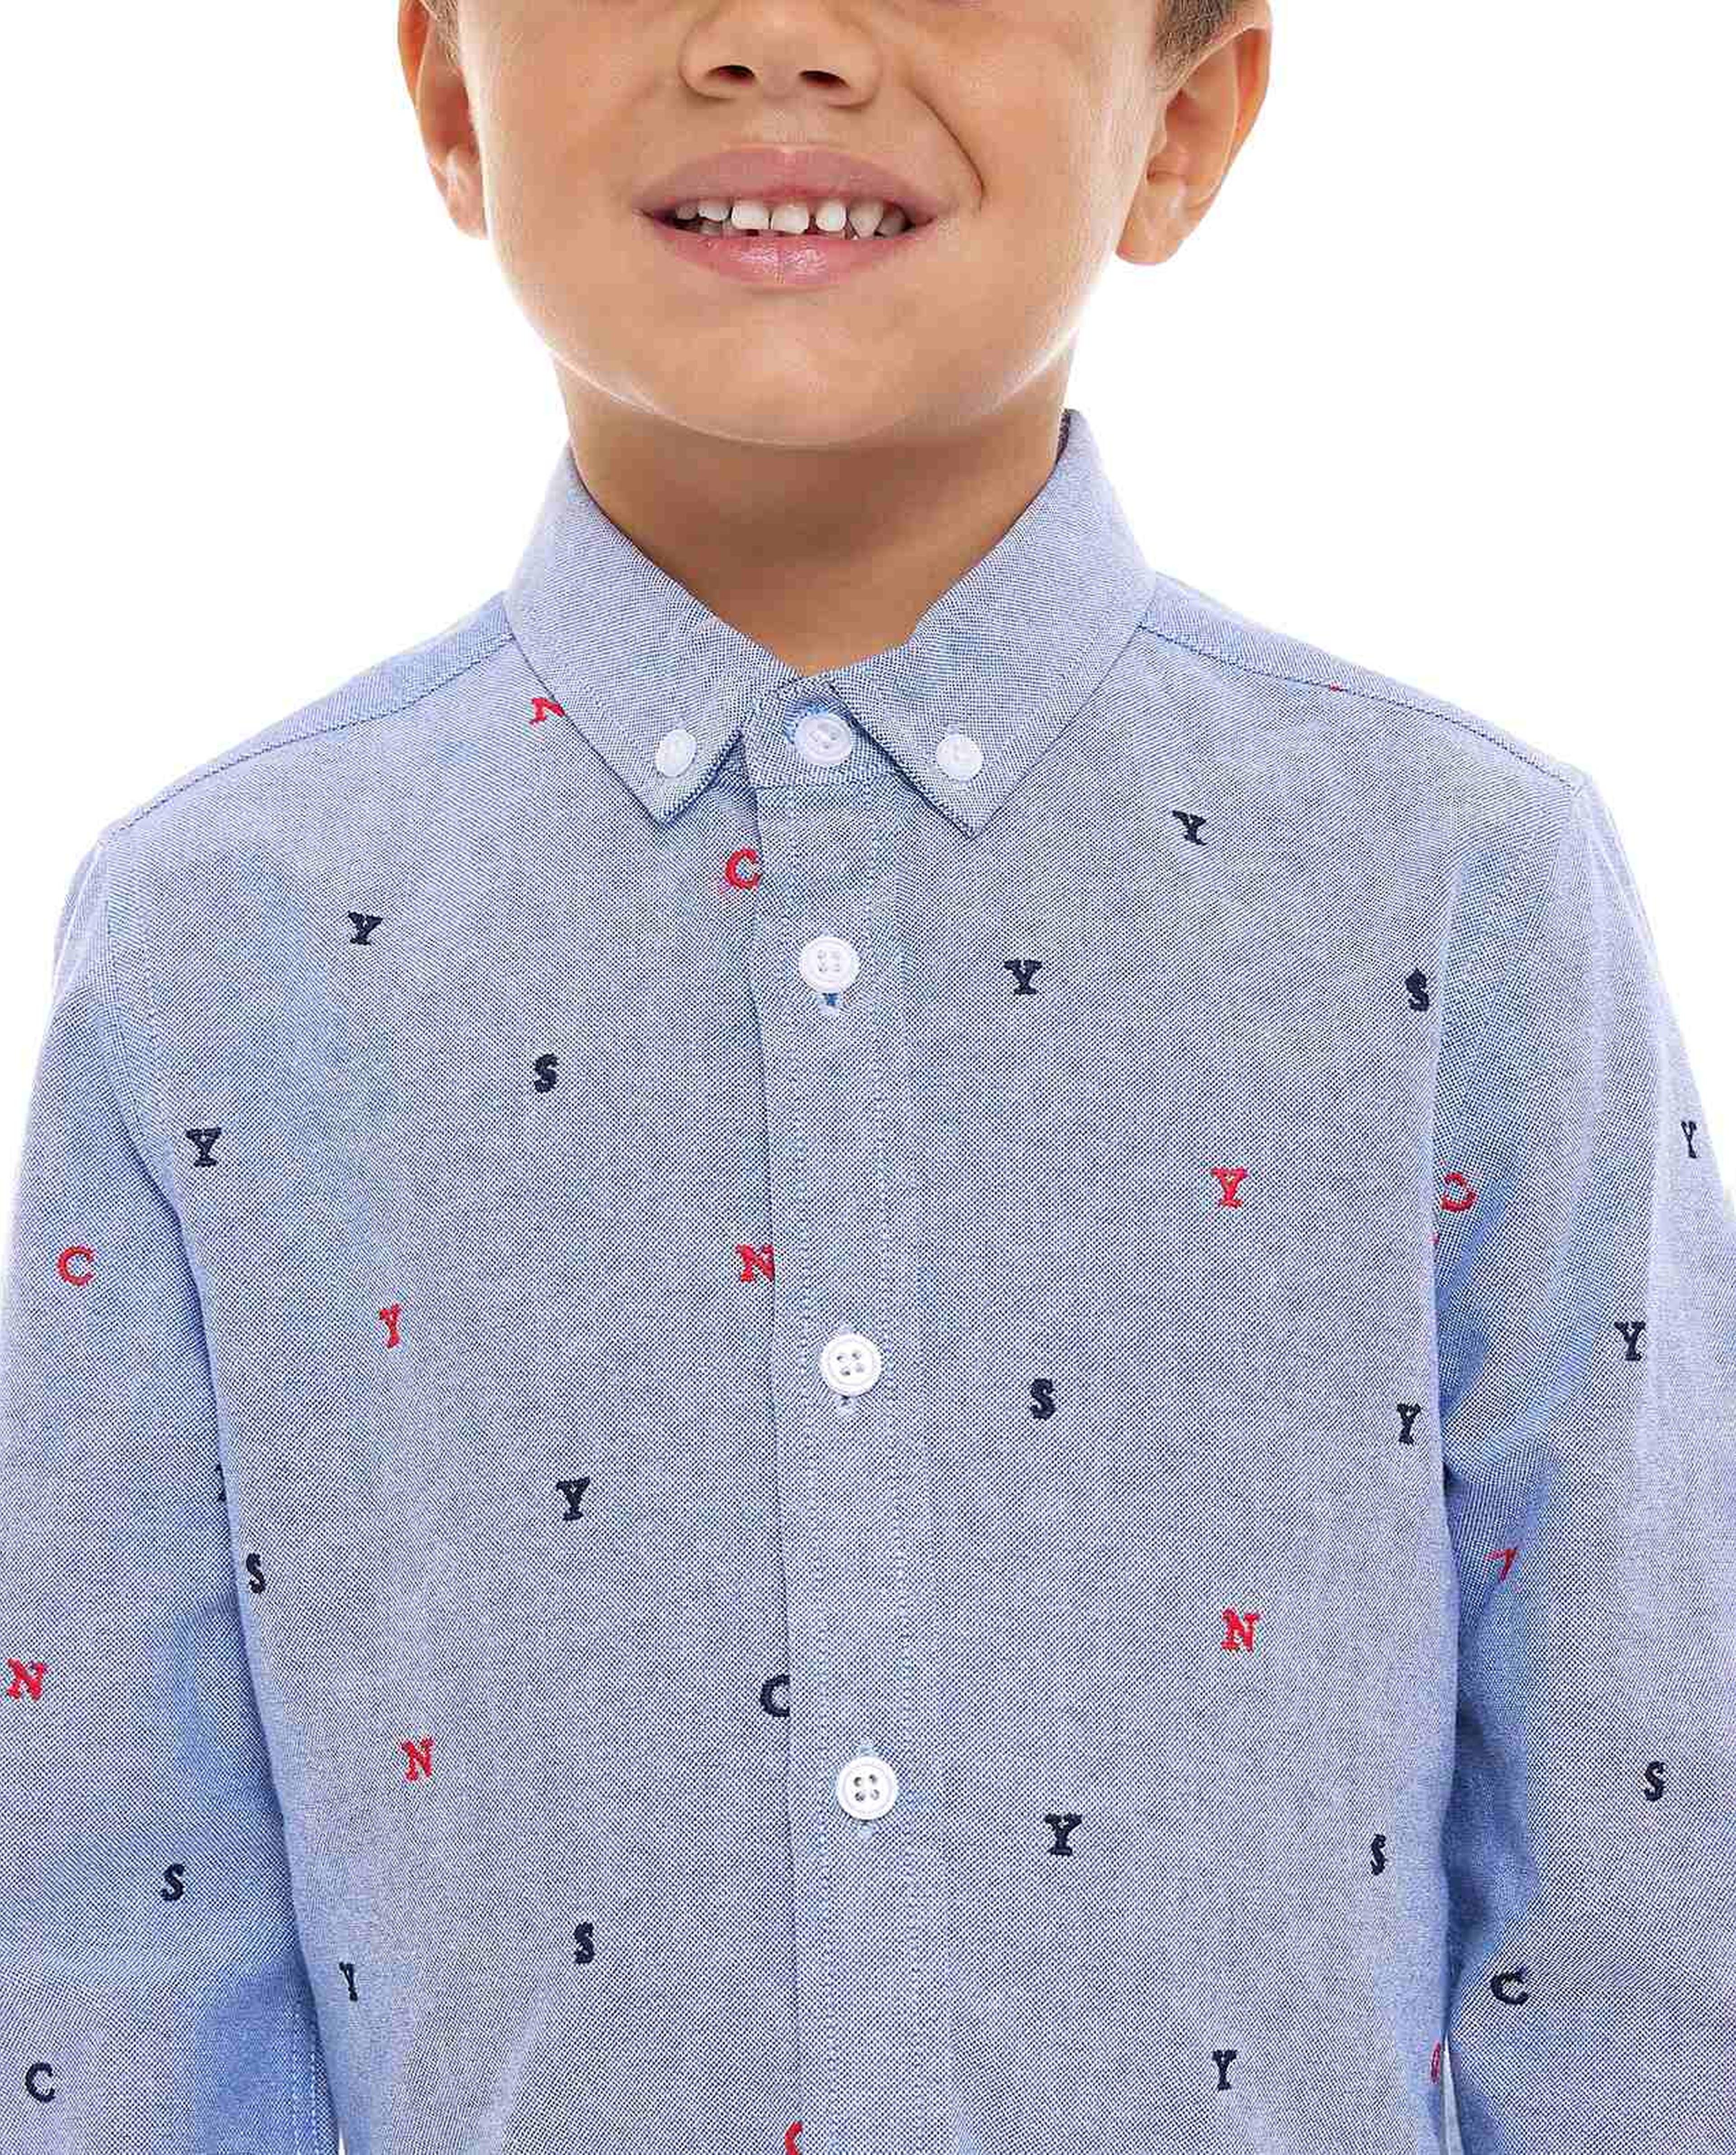 Embroidered Shirt with Classic Collar and Long Sleeves